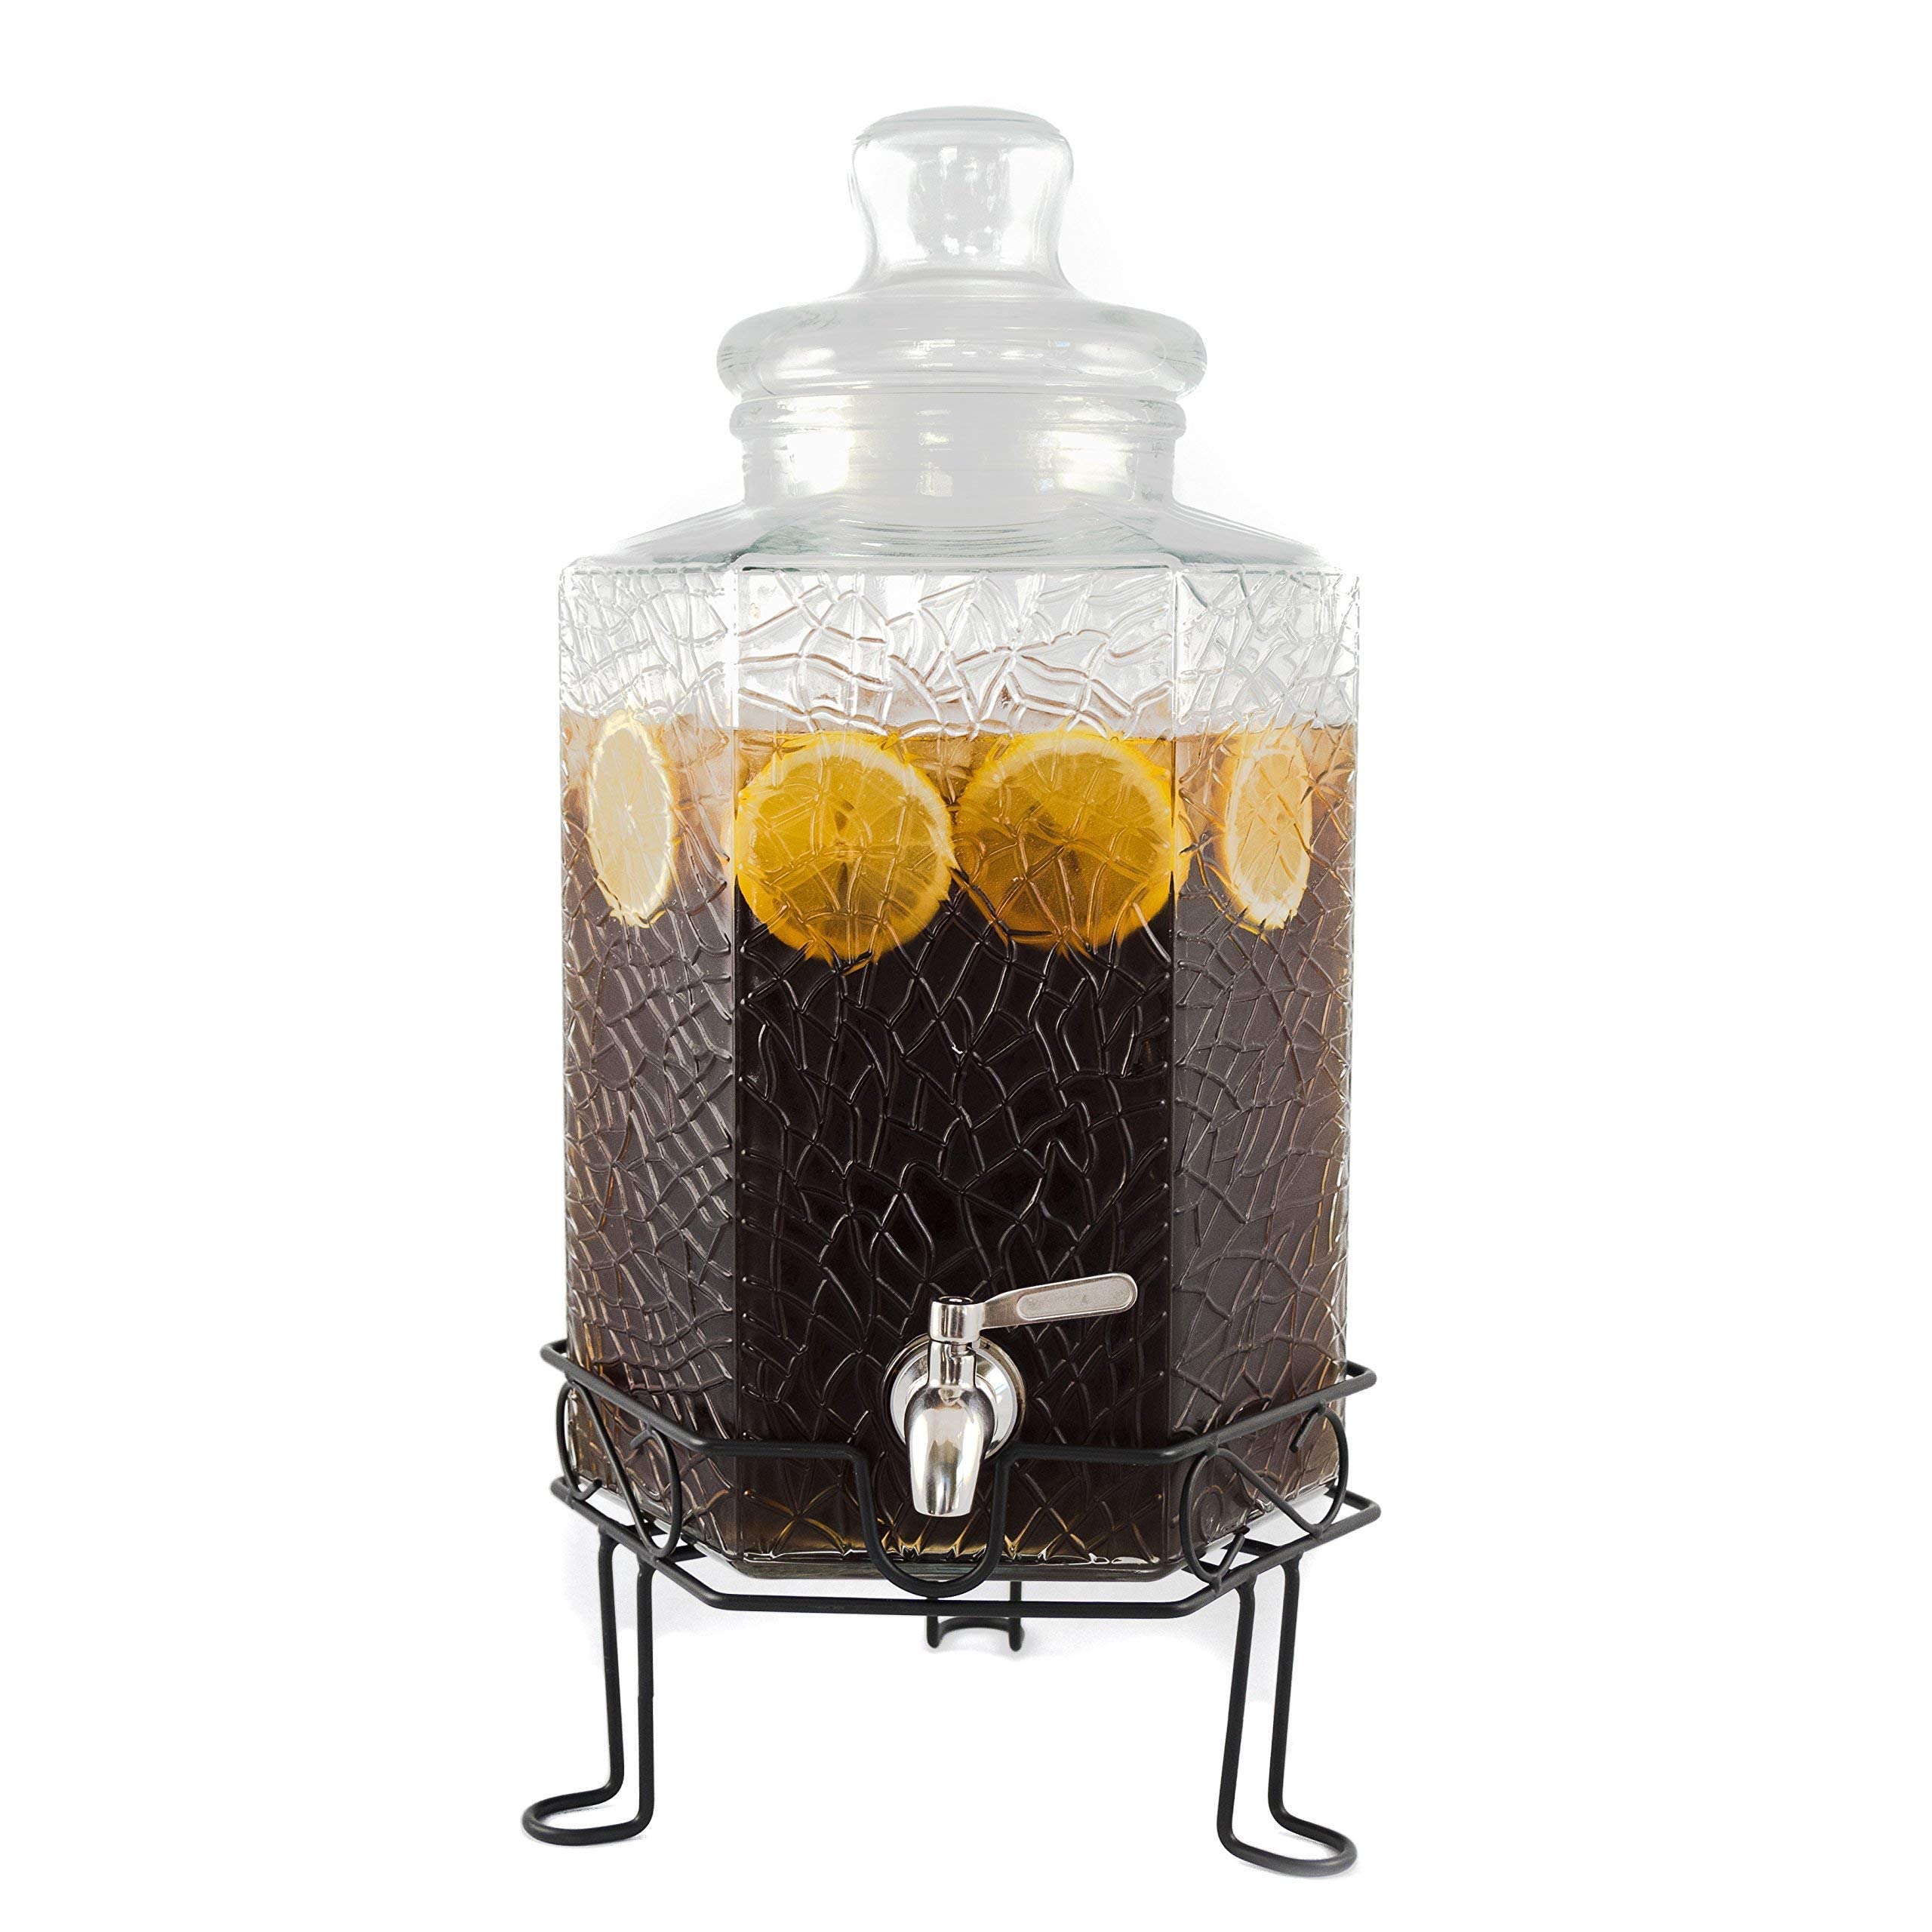 2.5 Gallon Glass Beverage Dispenser Stainless Spigot and Stand